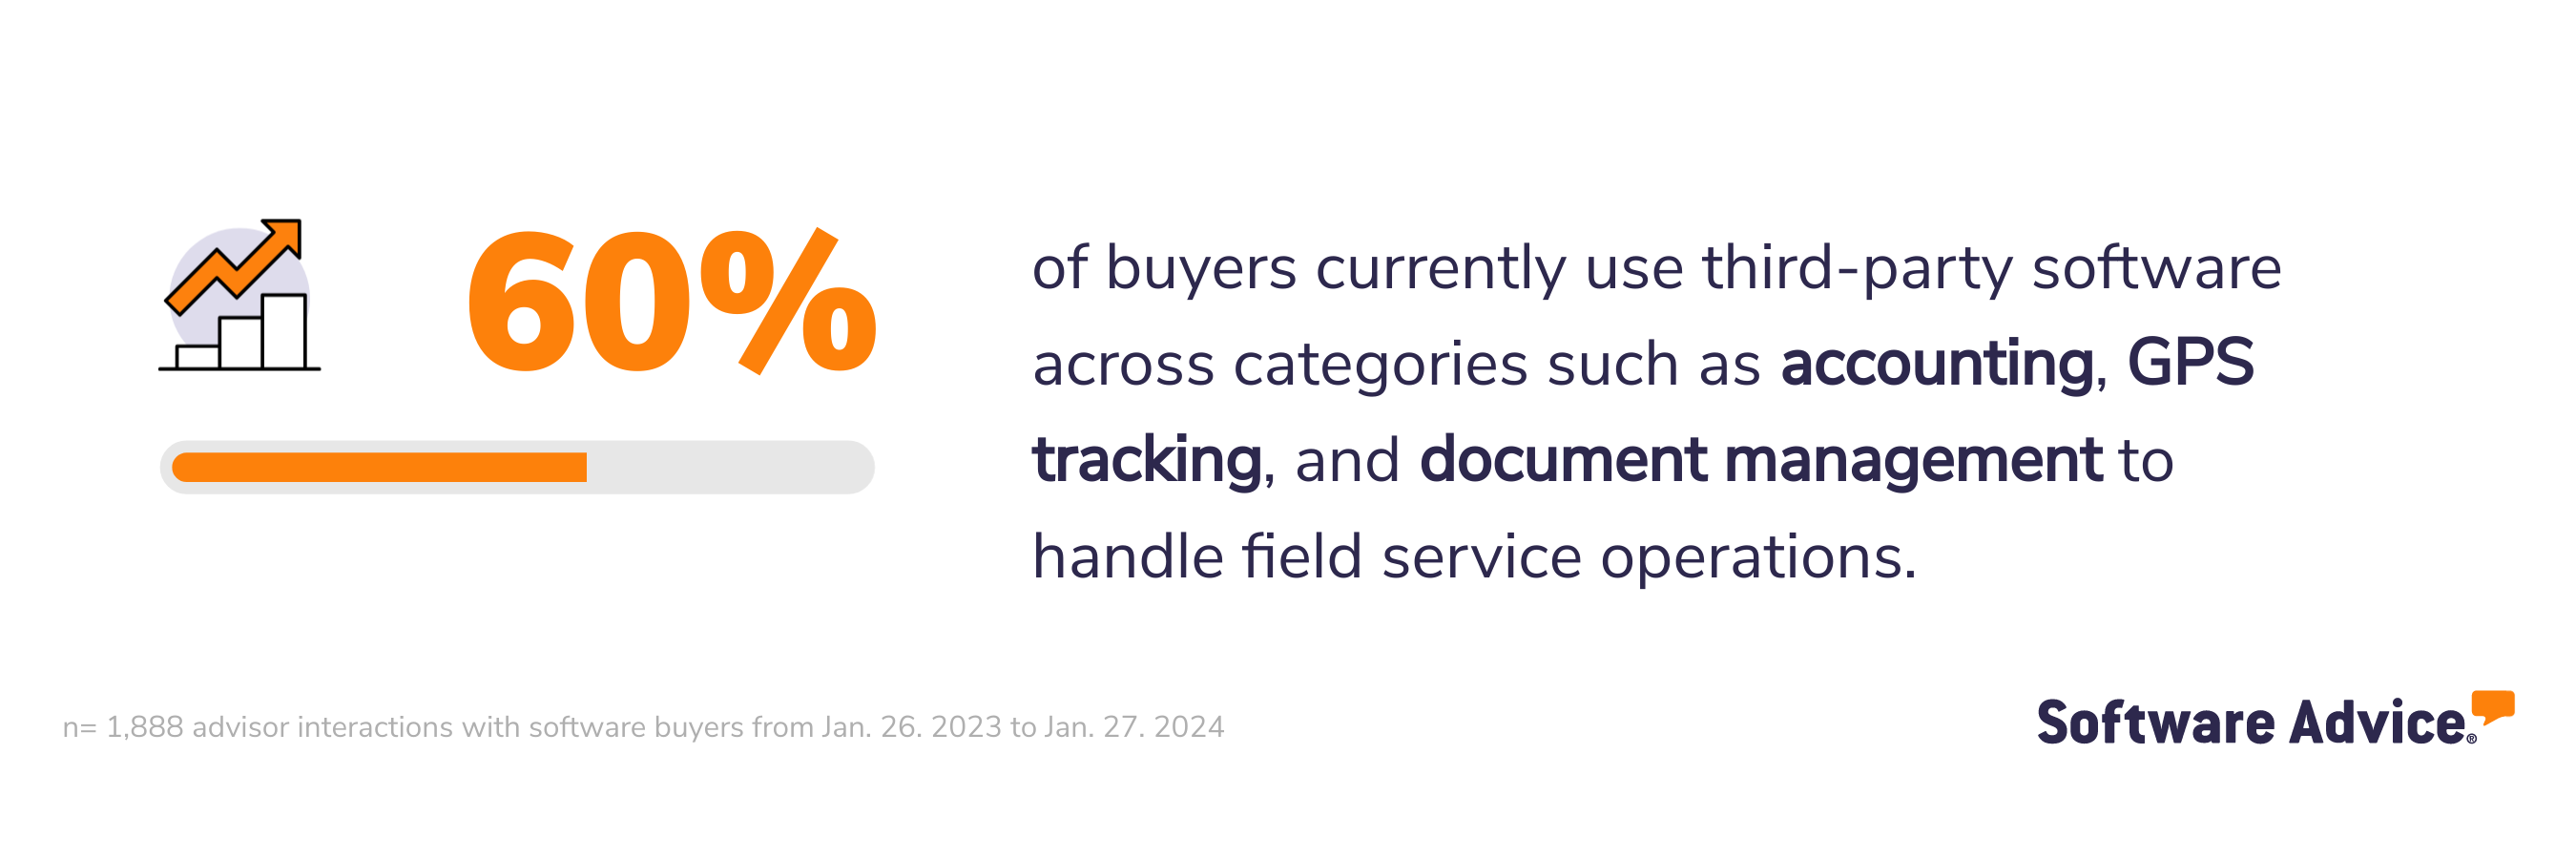 Software Advice graphic: 60% of buyers currently use third-party software like accounting, GPS tracking, and document management software for field service operations